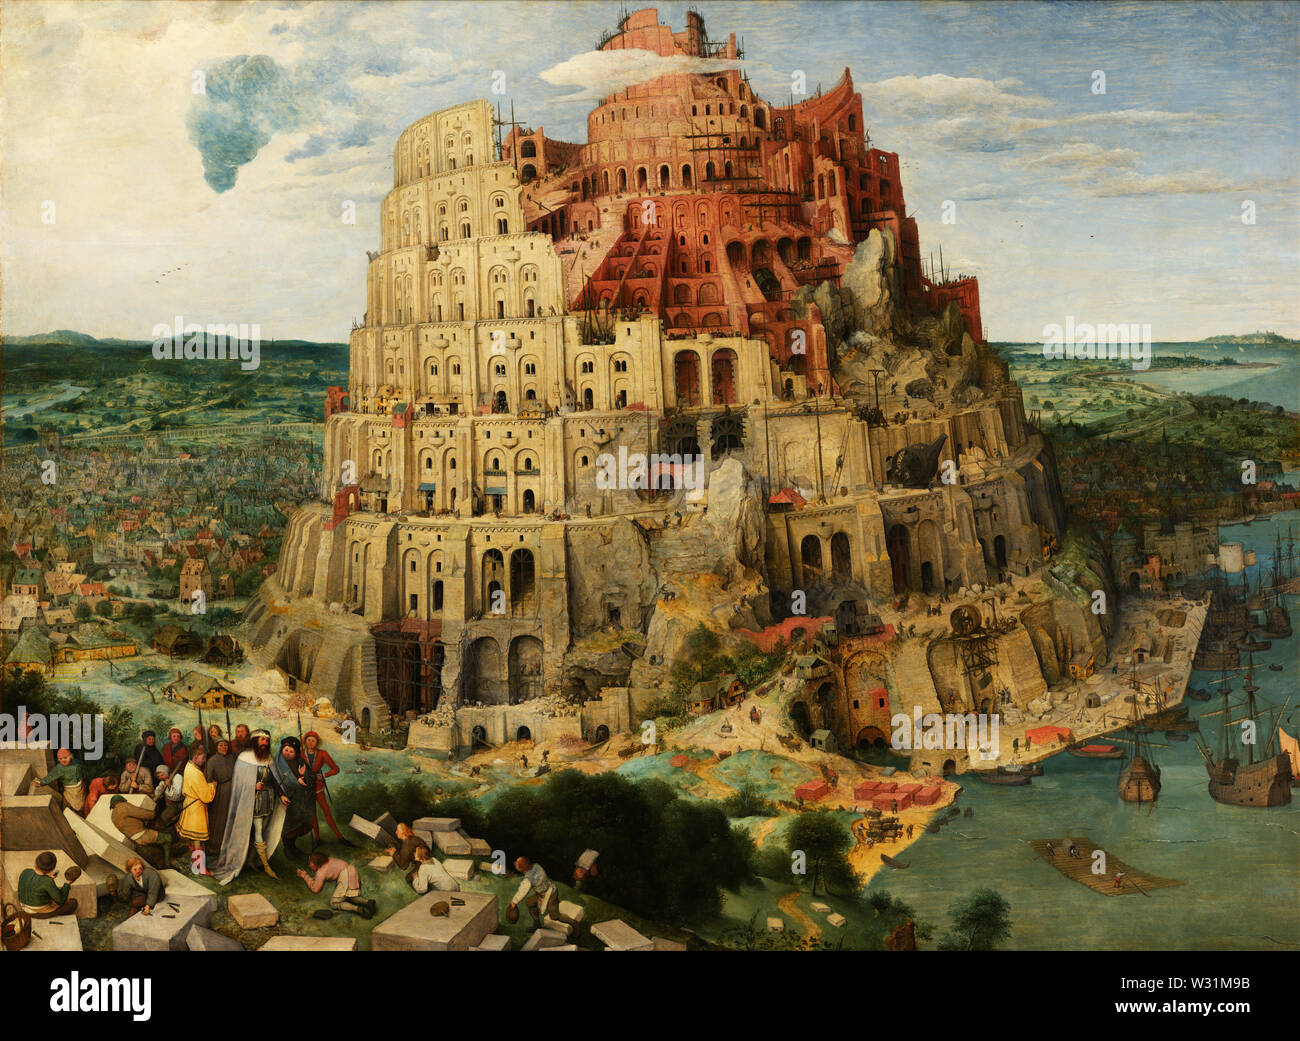 The Tower of Babel (Vienna) (1563) painting by Pieter Bruegel (Brueghel) the Elder (I) - Very high quality and resolution image Stock Photo